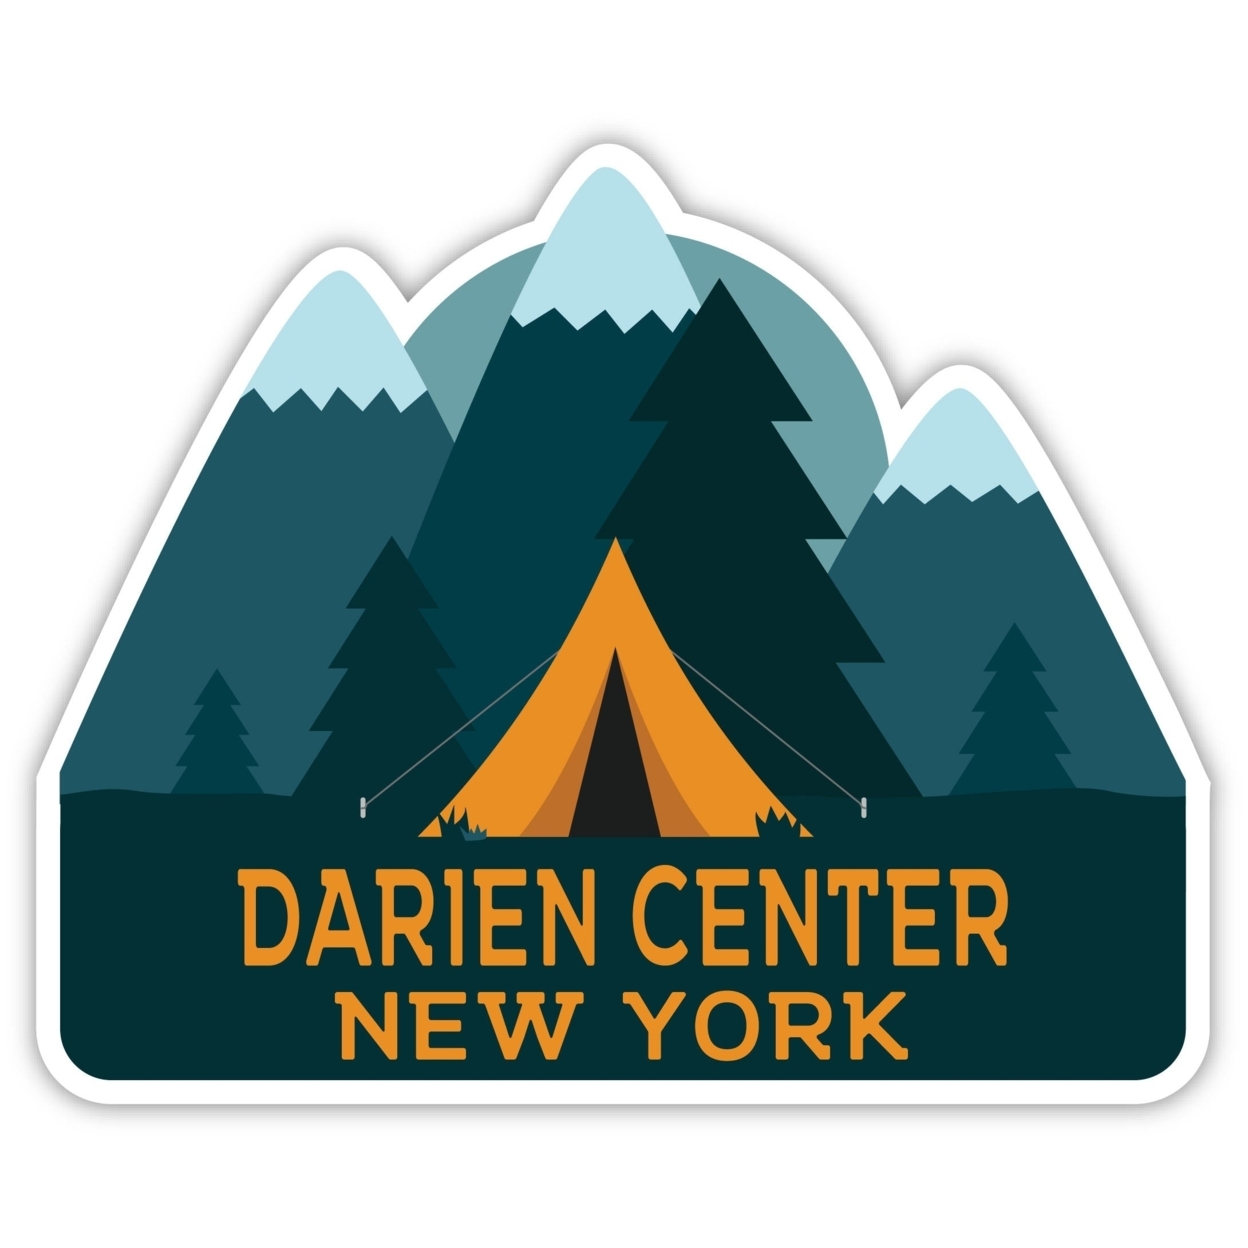 Darien Center New York Souvenir Decorative Stickers (Choose Theme And Size) - 4-Pack, 10-Inch, Bear